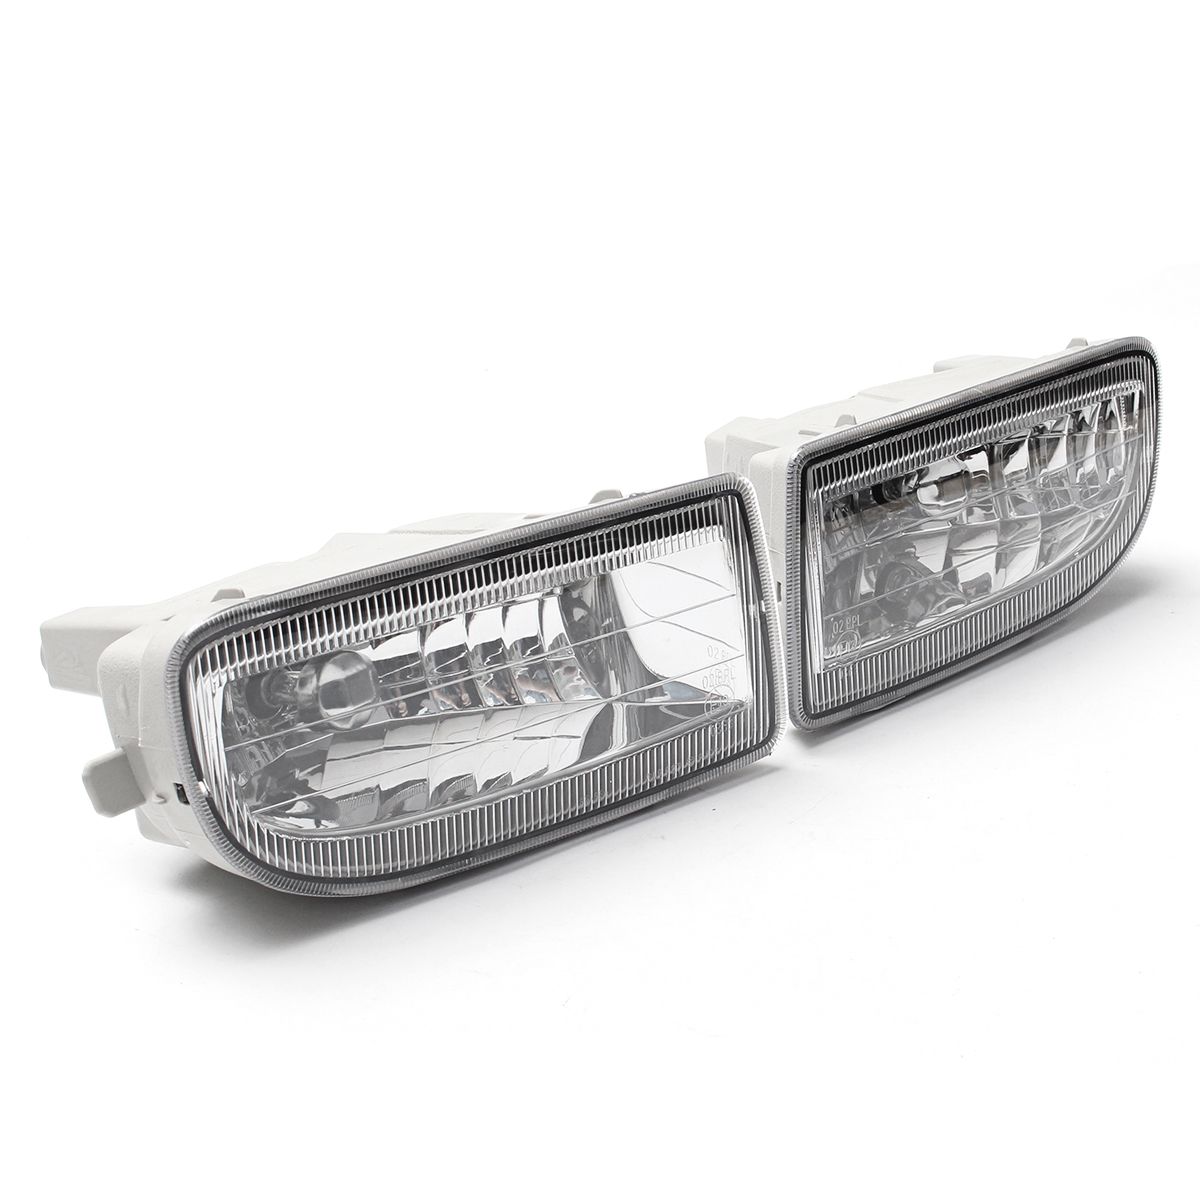 Pair-Clear-Car-Front-Driving-Fog-Lights-Lamp-with-9006-Bulbs-55W-For-Toyota-Land-Cruiser-1998-2007-1640172